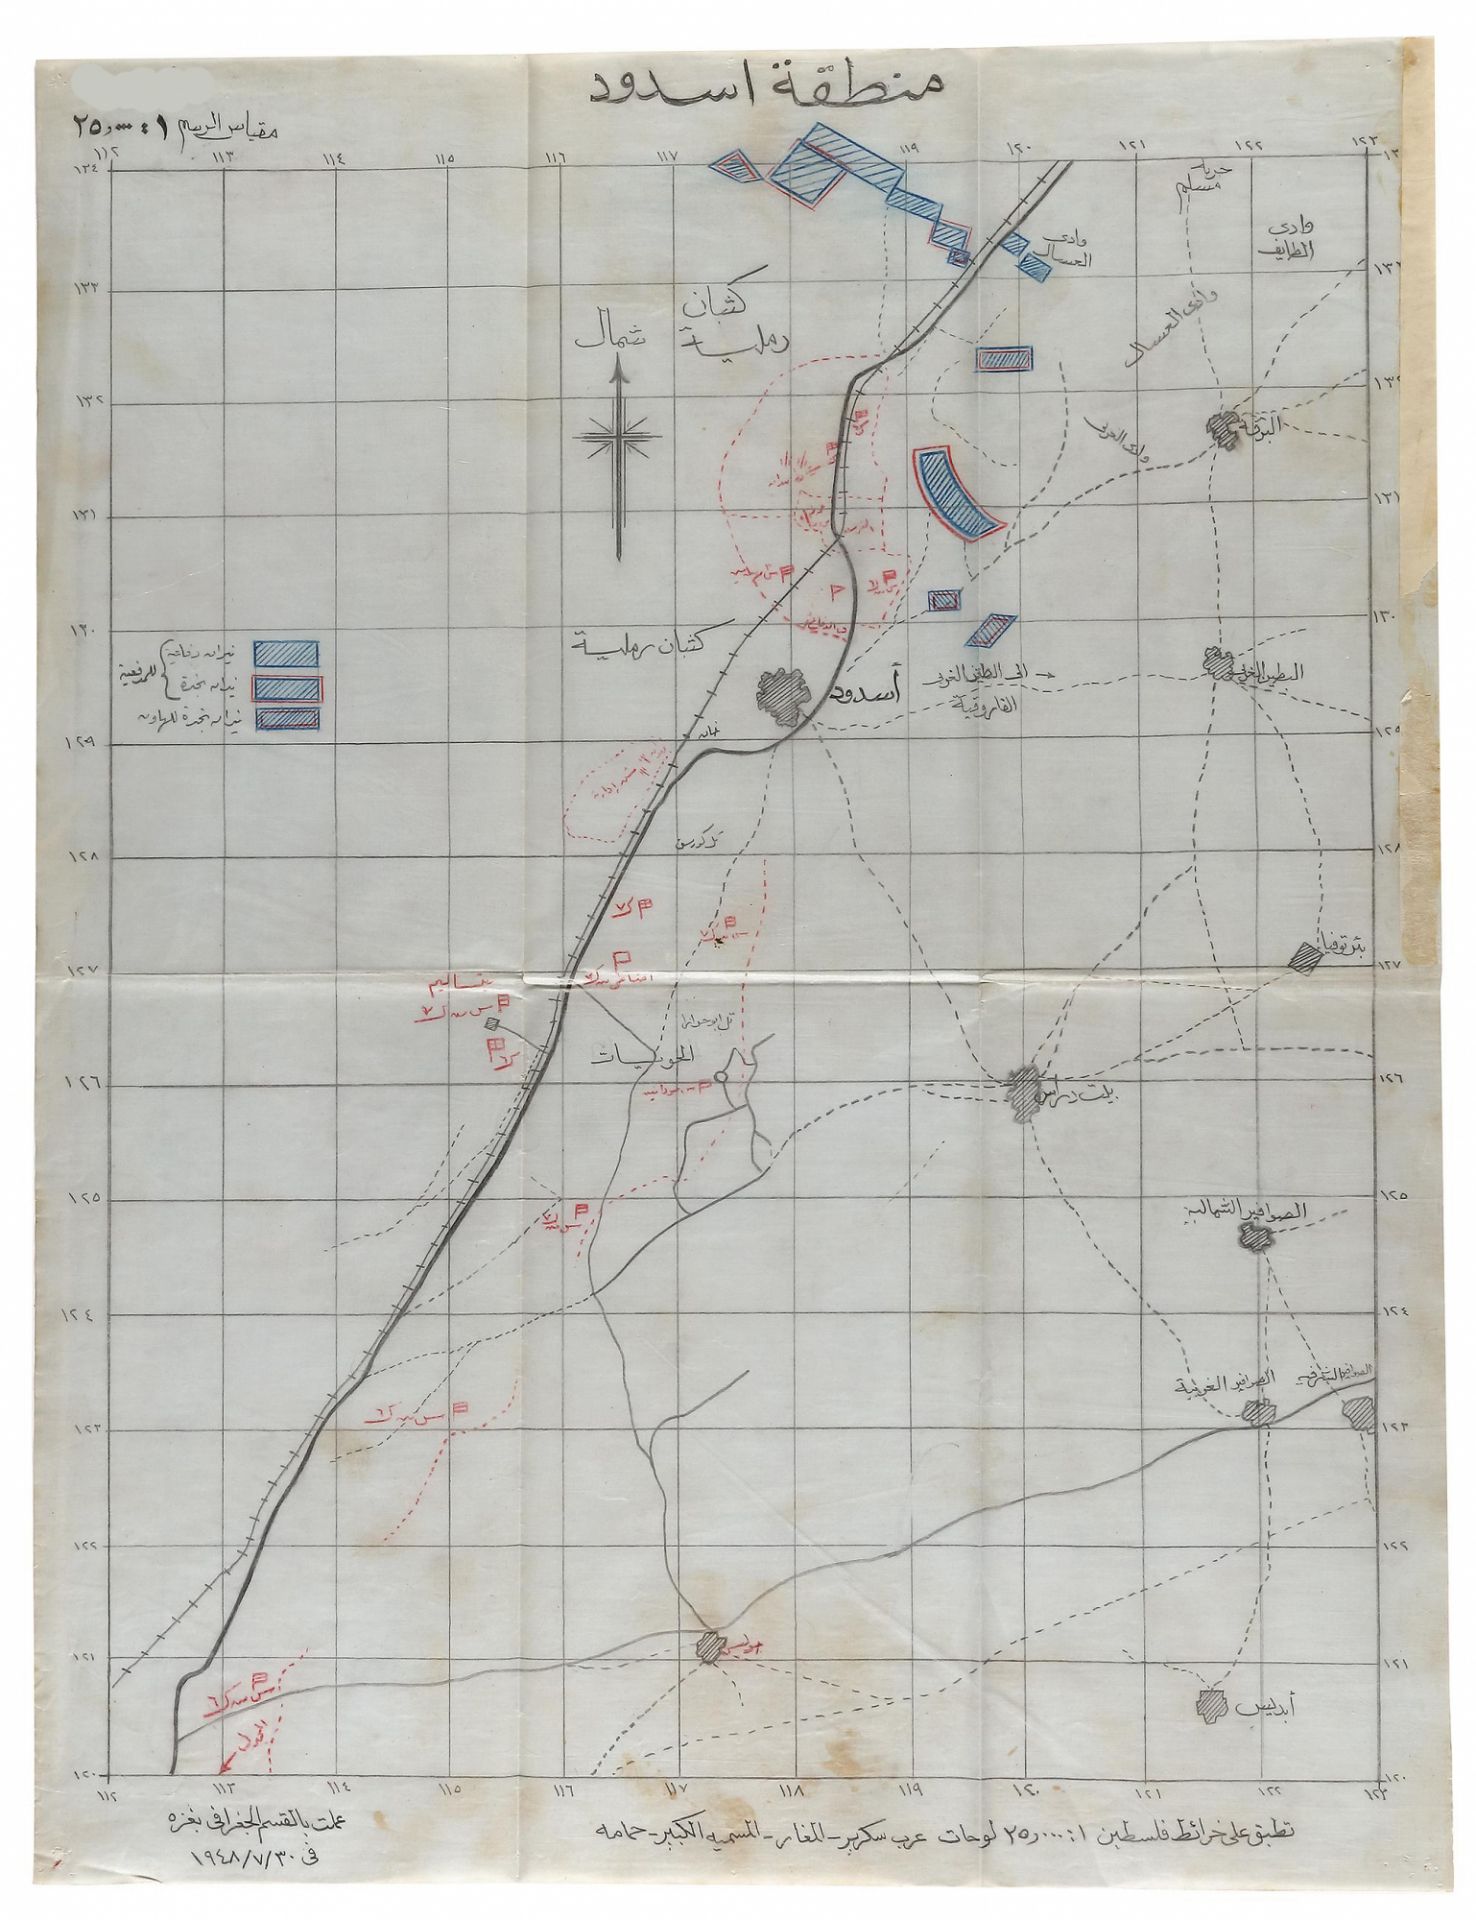 MIITARY MAPS AND DOCUMENTS SHOWING THE TOWNS/VILLAGES IN ASHDOD AND GAZA IN PALESTINE, PRINTED 5TH O - Image 4 of 6